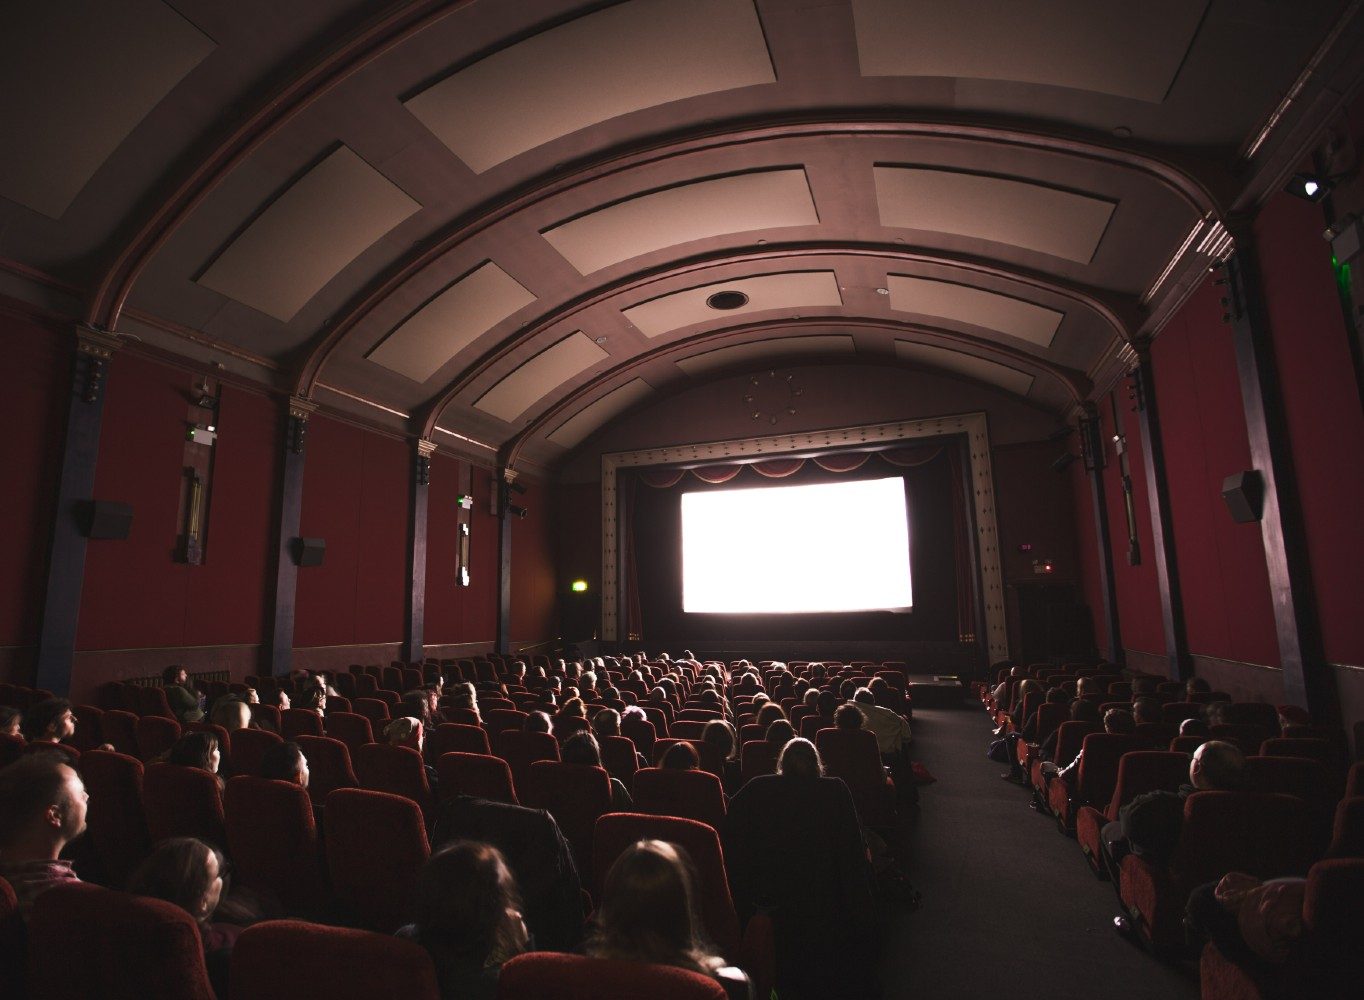 People sit in the dark in a maroon movie theatre, facing a bright white screen